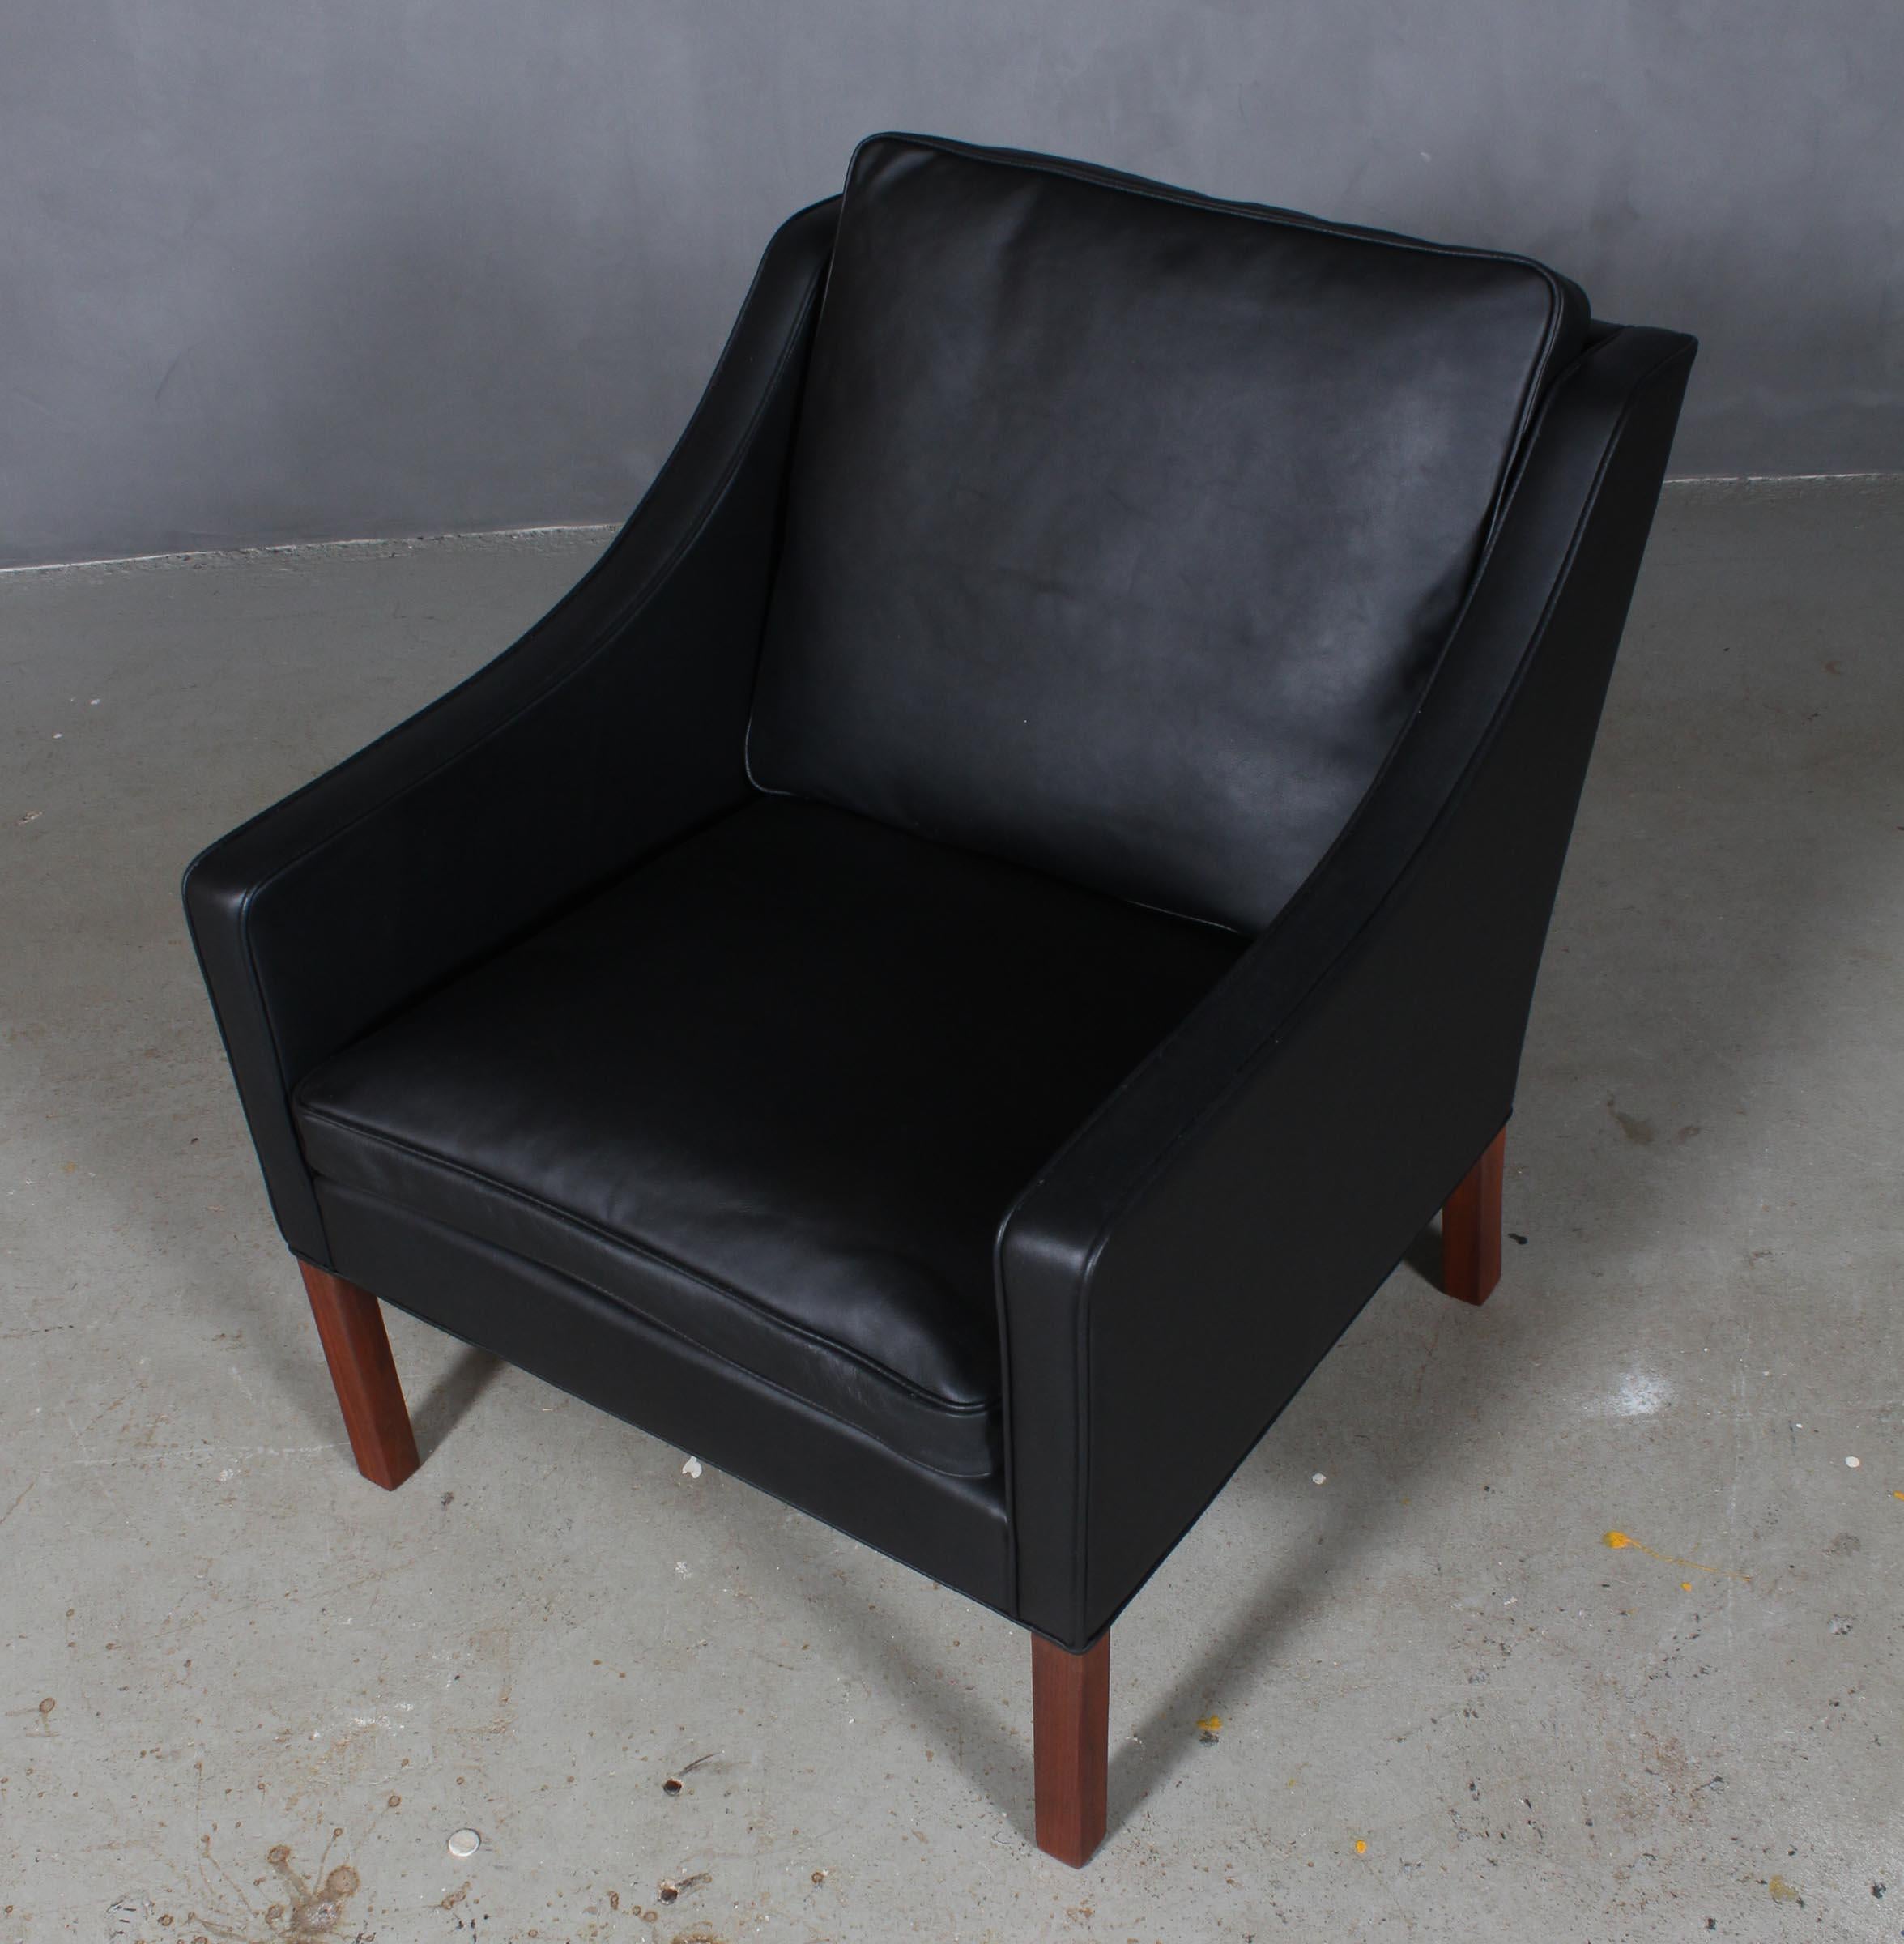 Børge Mogensen lounge chair new upholstered with black elegance aniline leather.

Legs of teak.

Model 2207, made by Fredericia furniture.